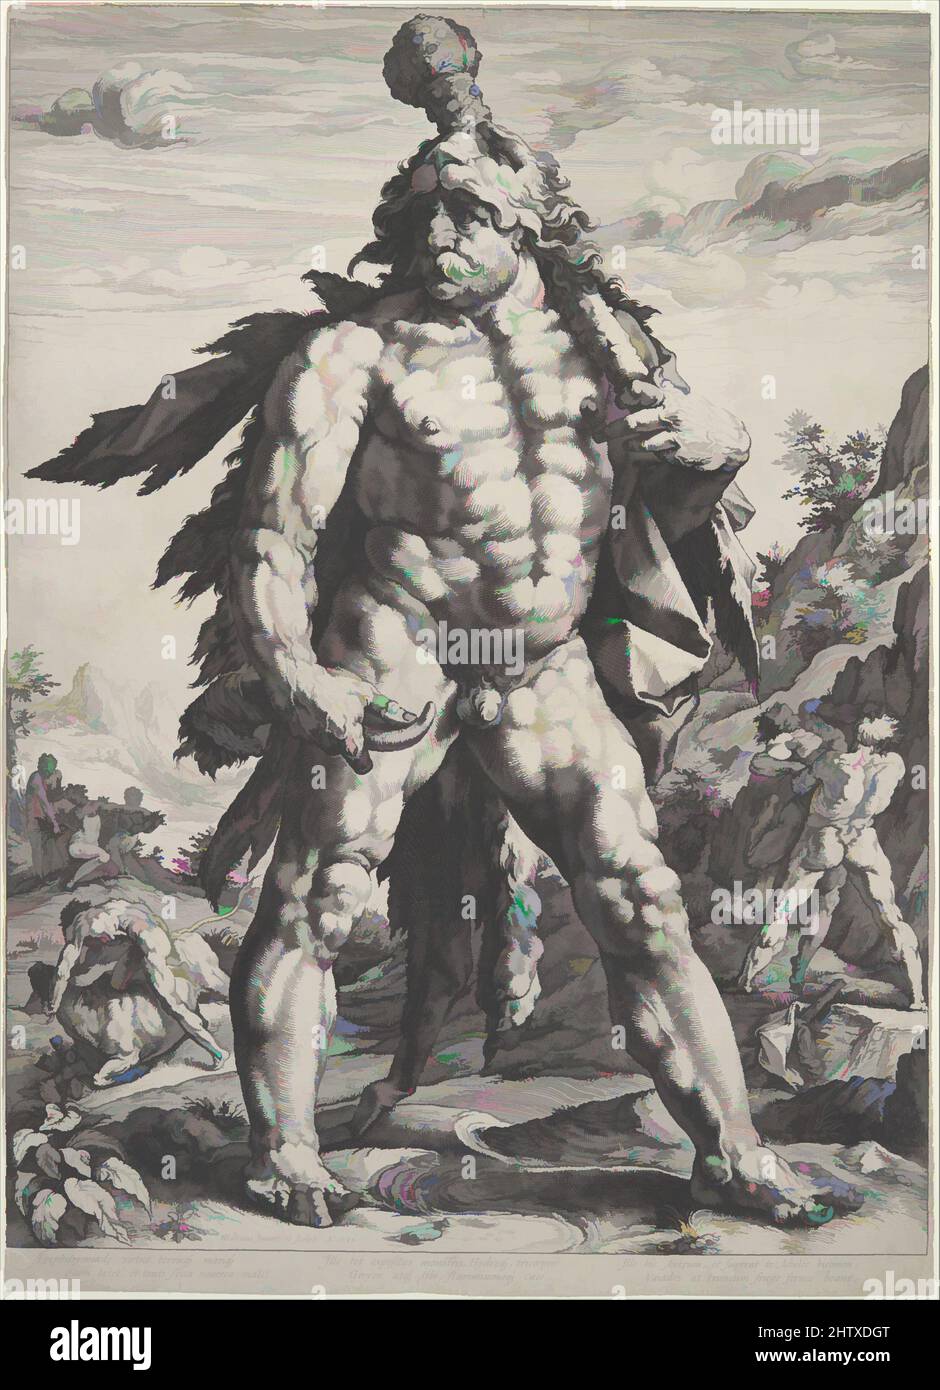 Art inspired by The Great Hercules, 1589, Engraving, 21 7/8 x 15 7/8 in. (55.5 x 40.4 cm), Prints, Hendrick Goltzius (Netherlandish, Mühlbracht 1558–1617 Haarlem), This remarkable engraving has long been known as the Knollenman, or bulbous man. It shows Goltzius's bulging-muscle figure, Classic works modernized by Artotop with a splash of modernity. Shapes, color and value, eye-catching visual impact on art. Emotions through freedom of artworks in a contemporary way. A timeless message pursuing a wildly creative new direction. Artists turning to the digital medium and creating the Artotop NFT Stock Photo